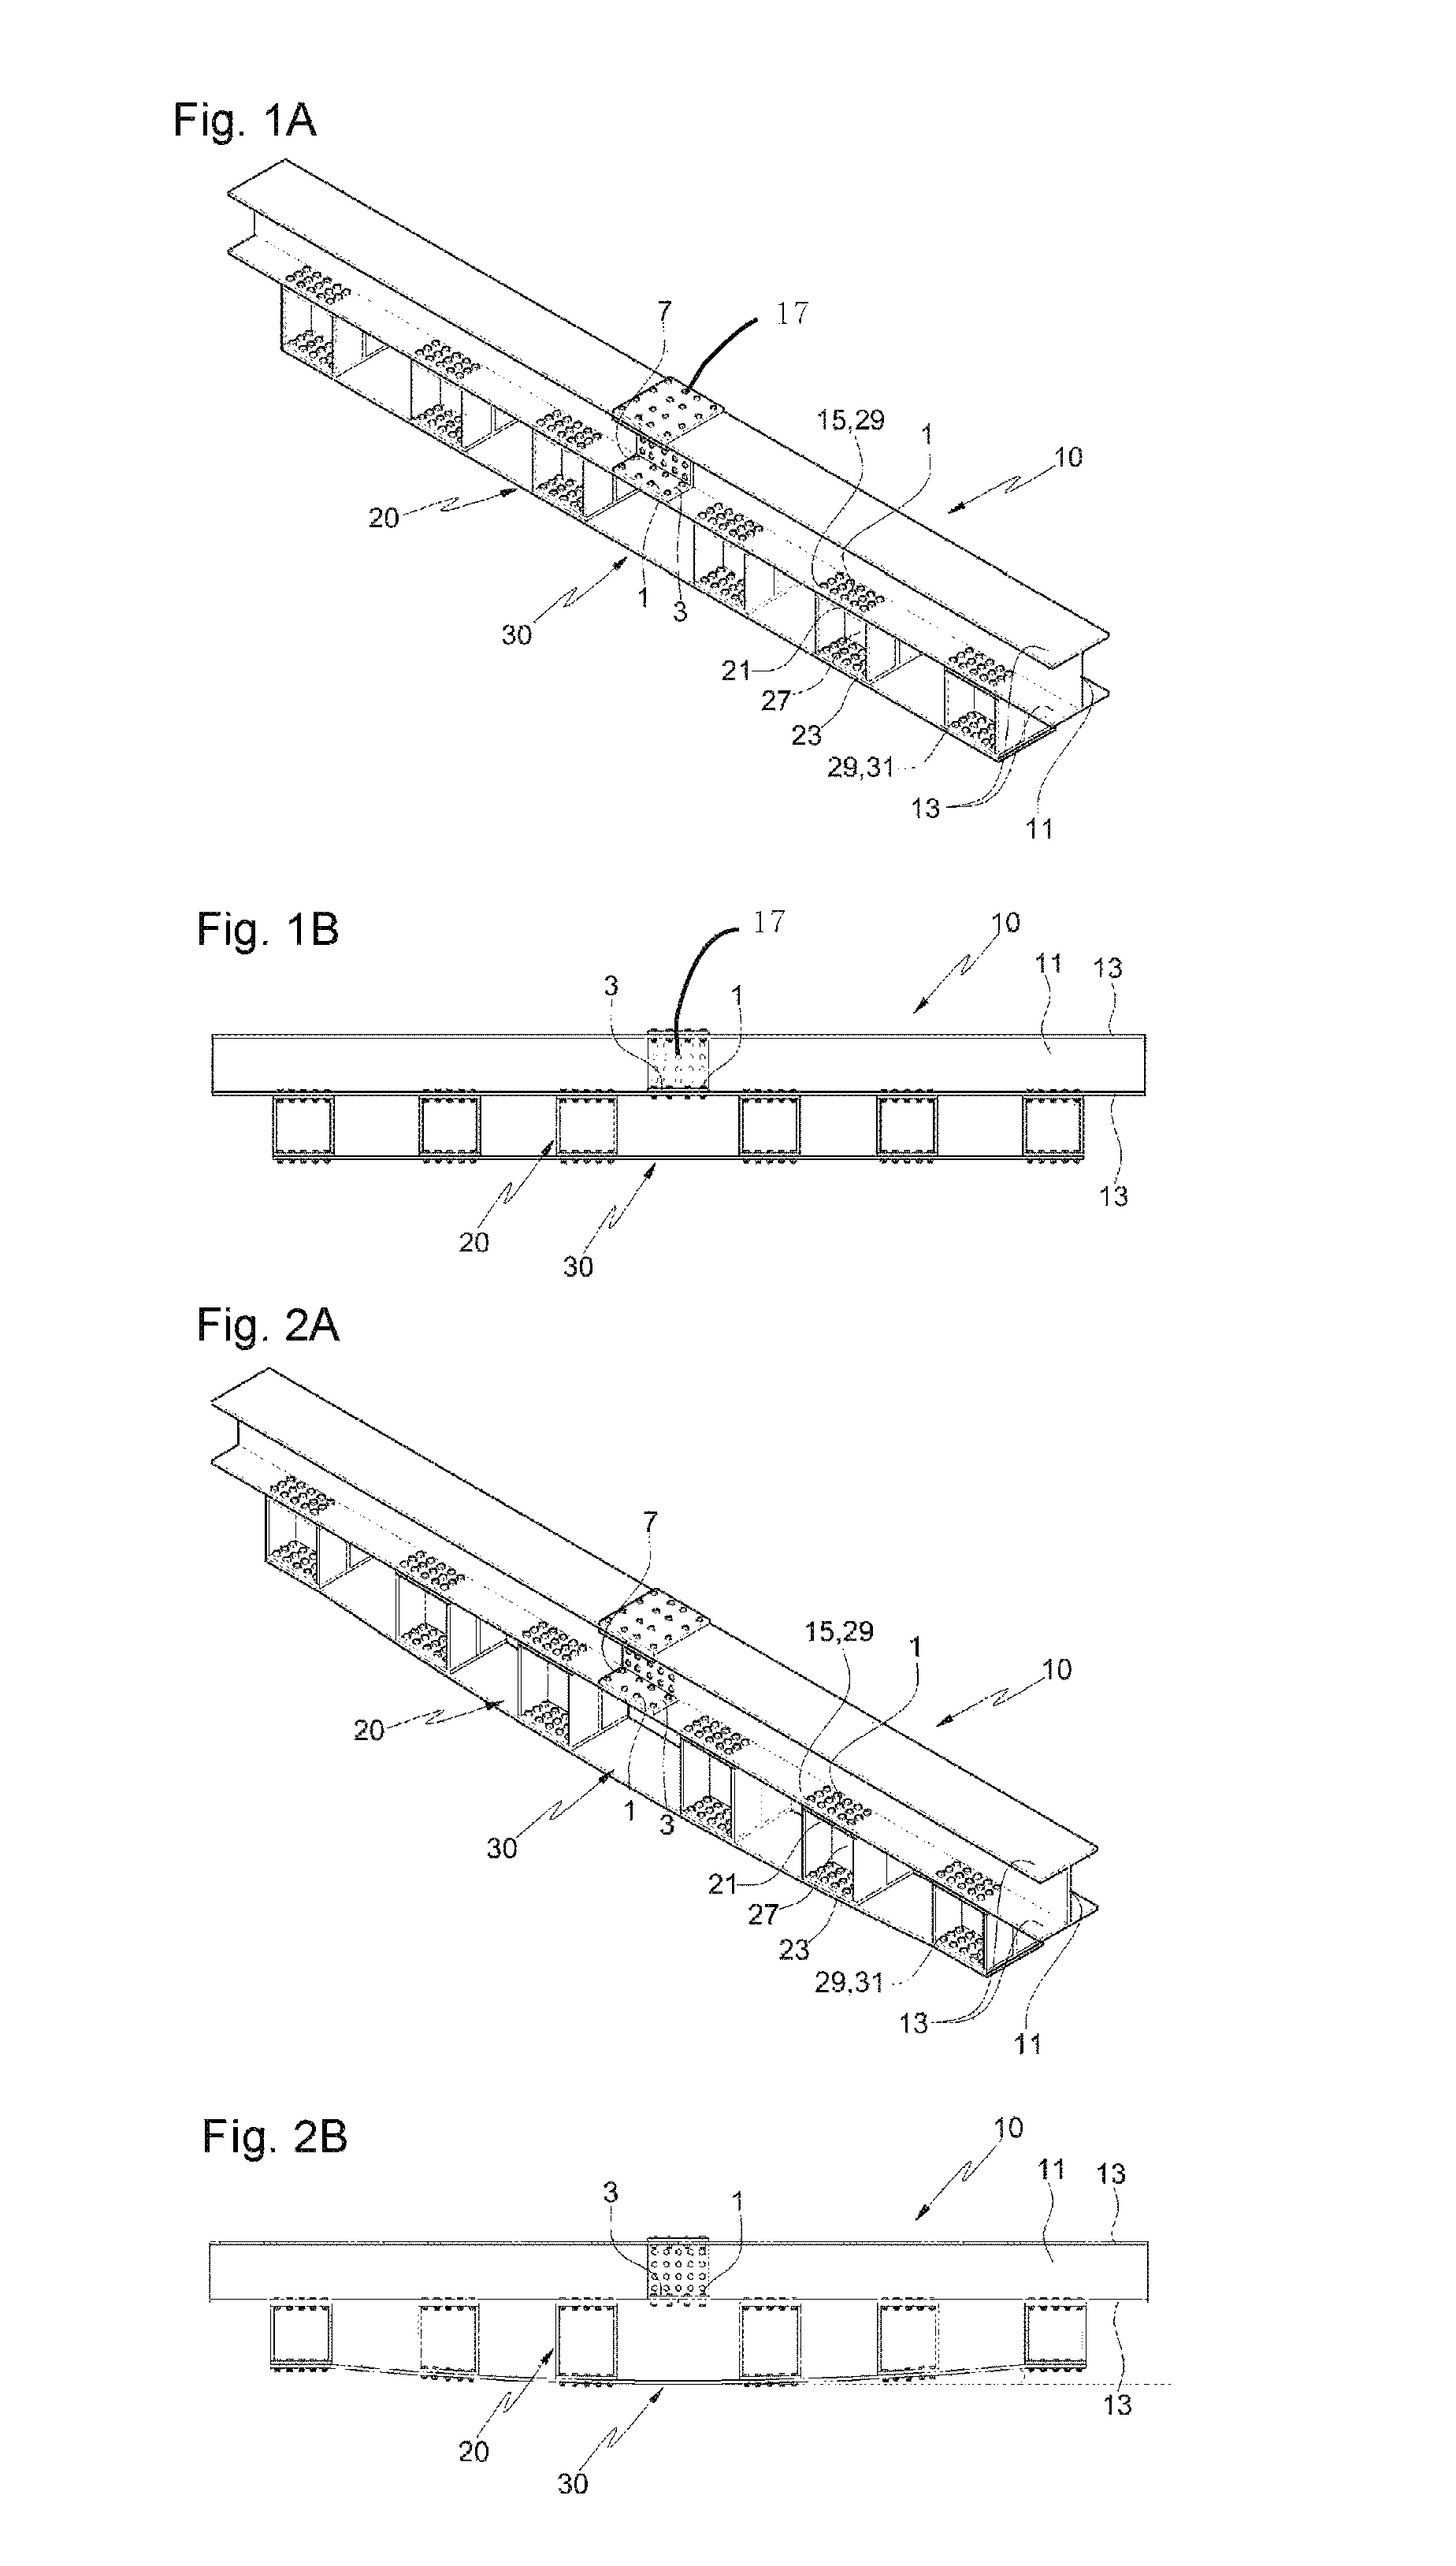 Steel structure including pre-stressing brackets for improving load-carrying capacity and serviceability